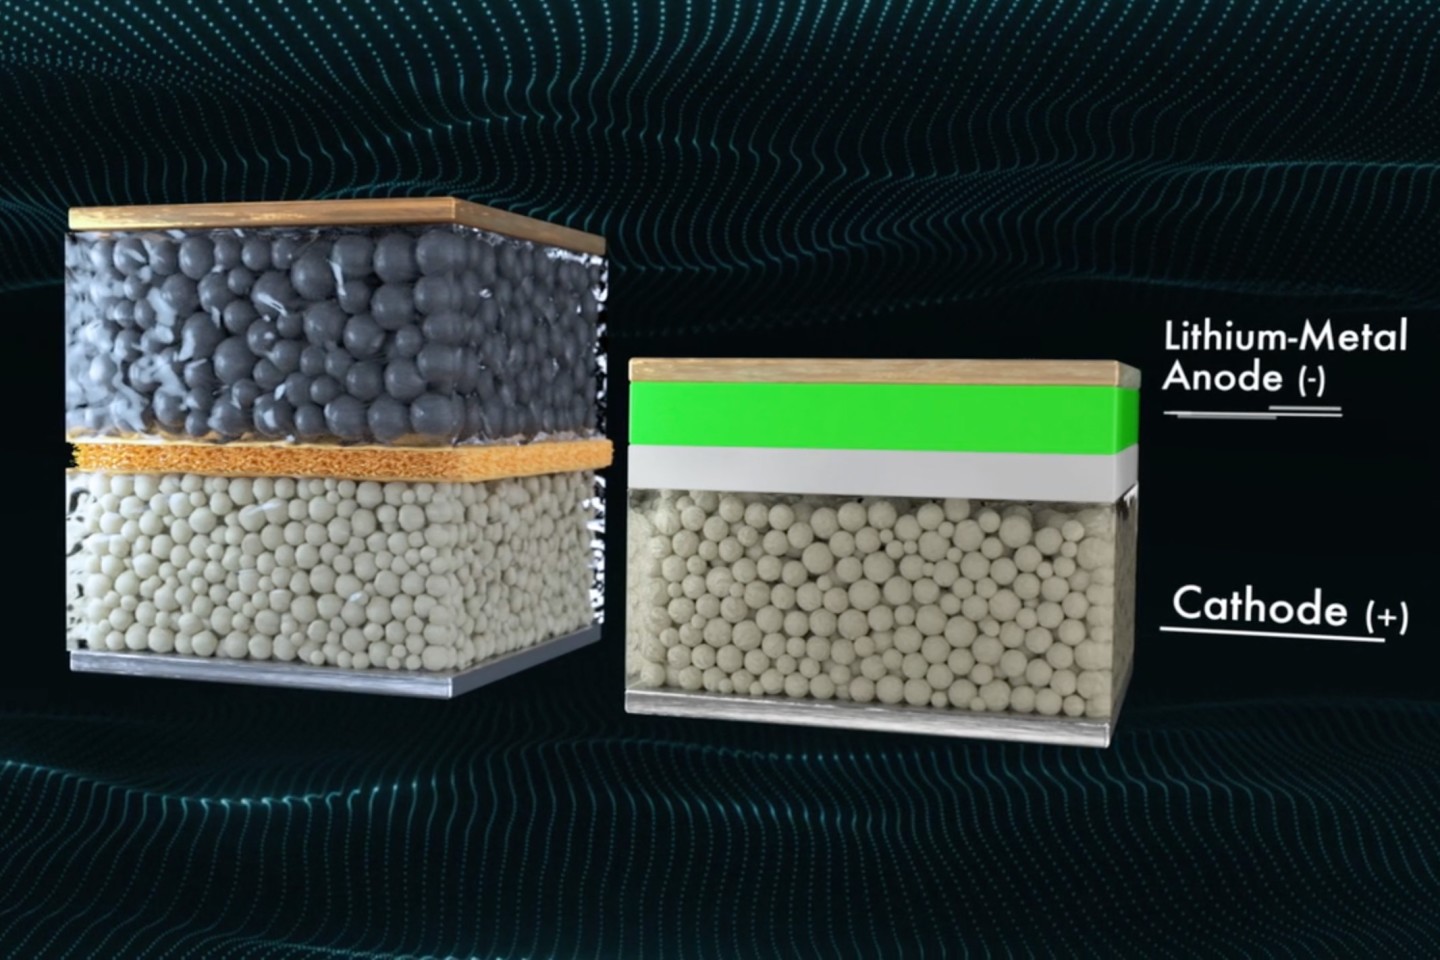 QuantumScape's solid state battery (right) stores far more energy per weight and volume than regular lithium-ion cells (left), and has just passed a series of EV-related tests with flying colors